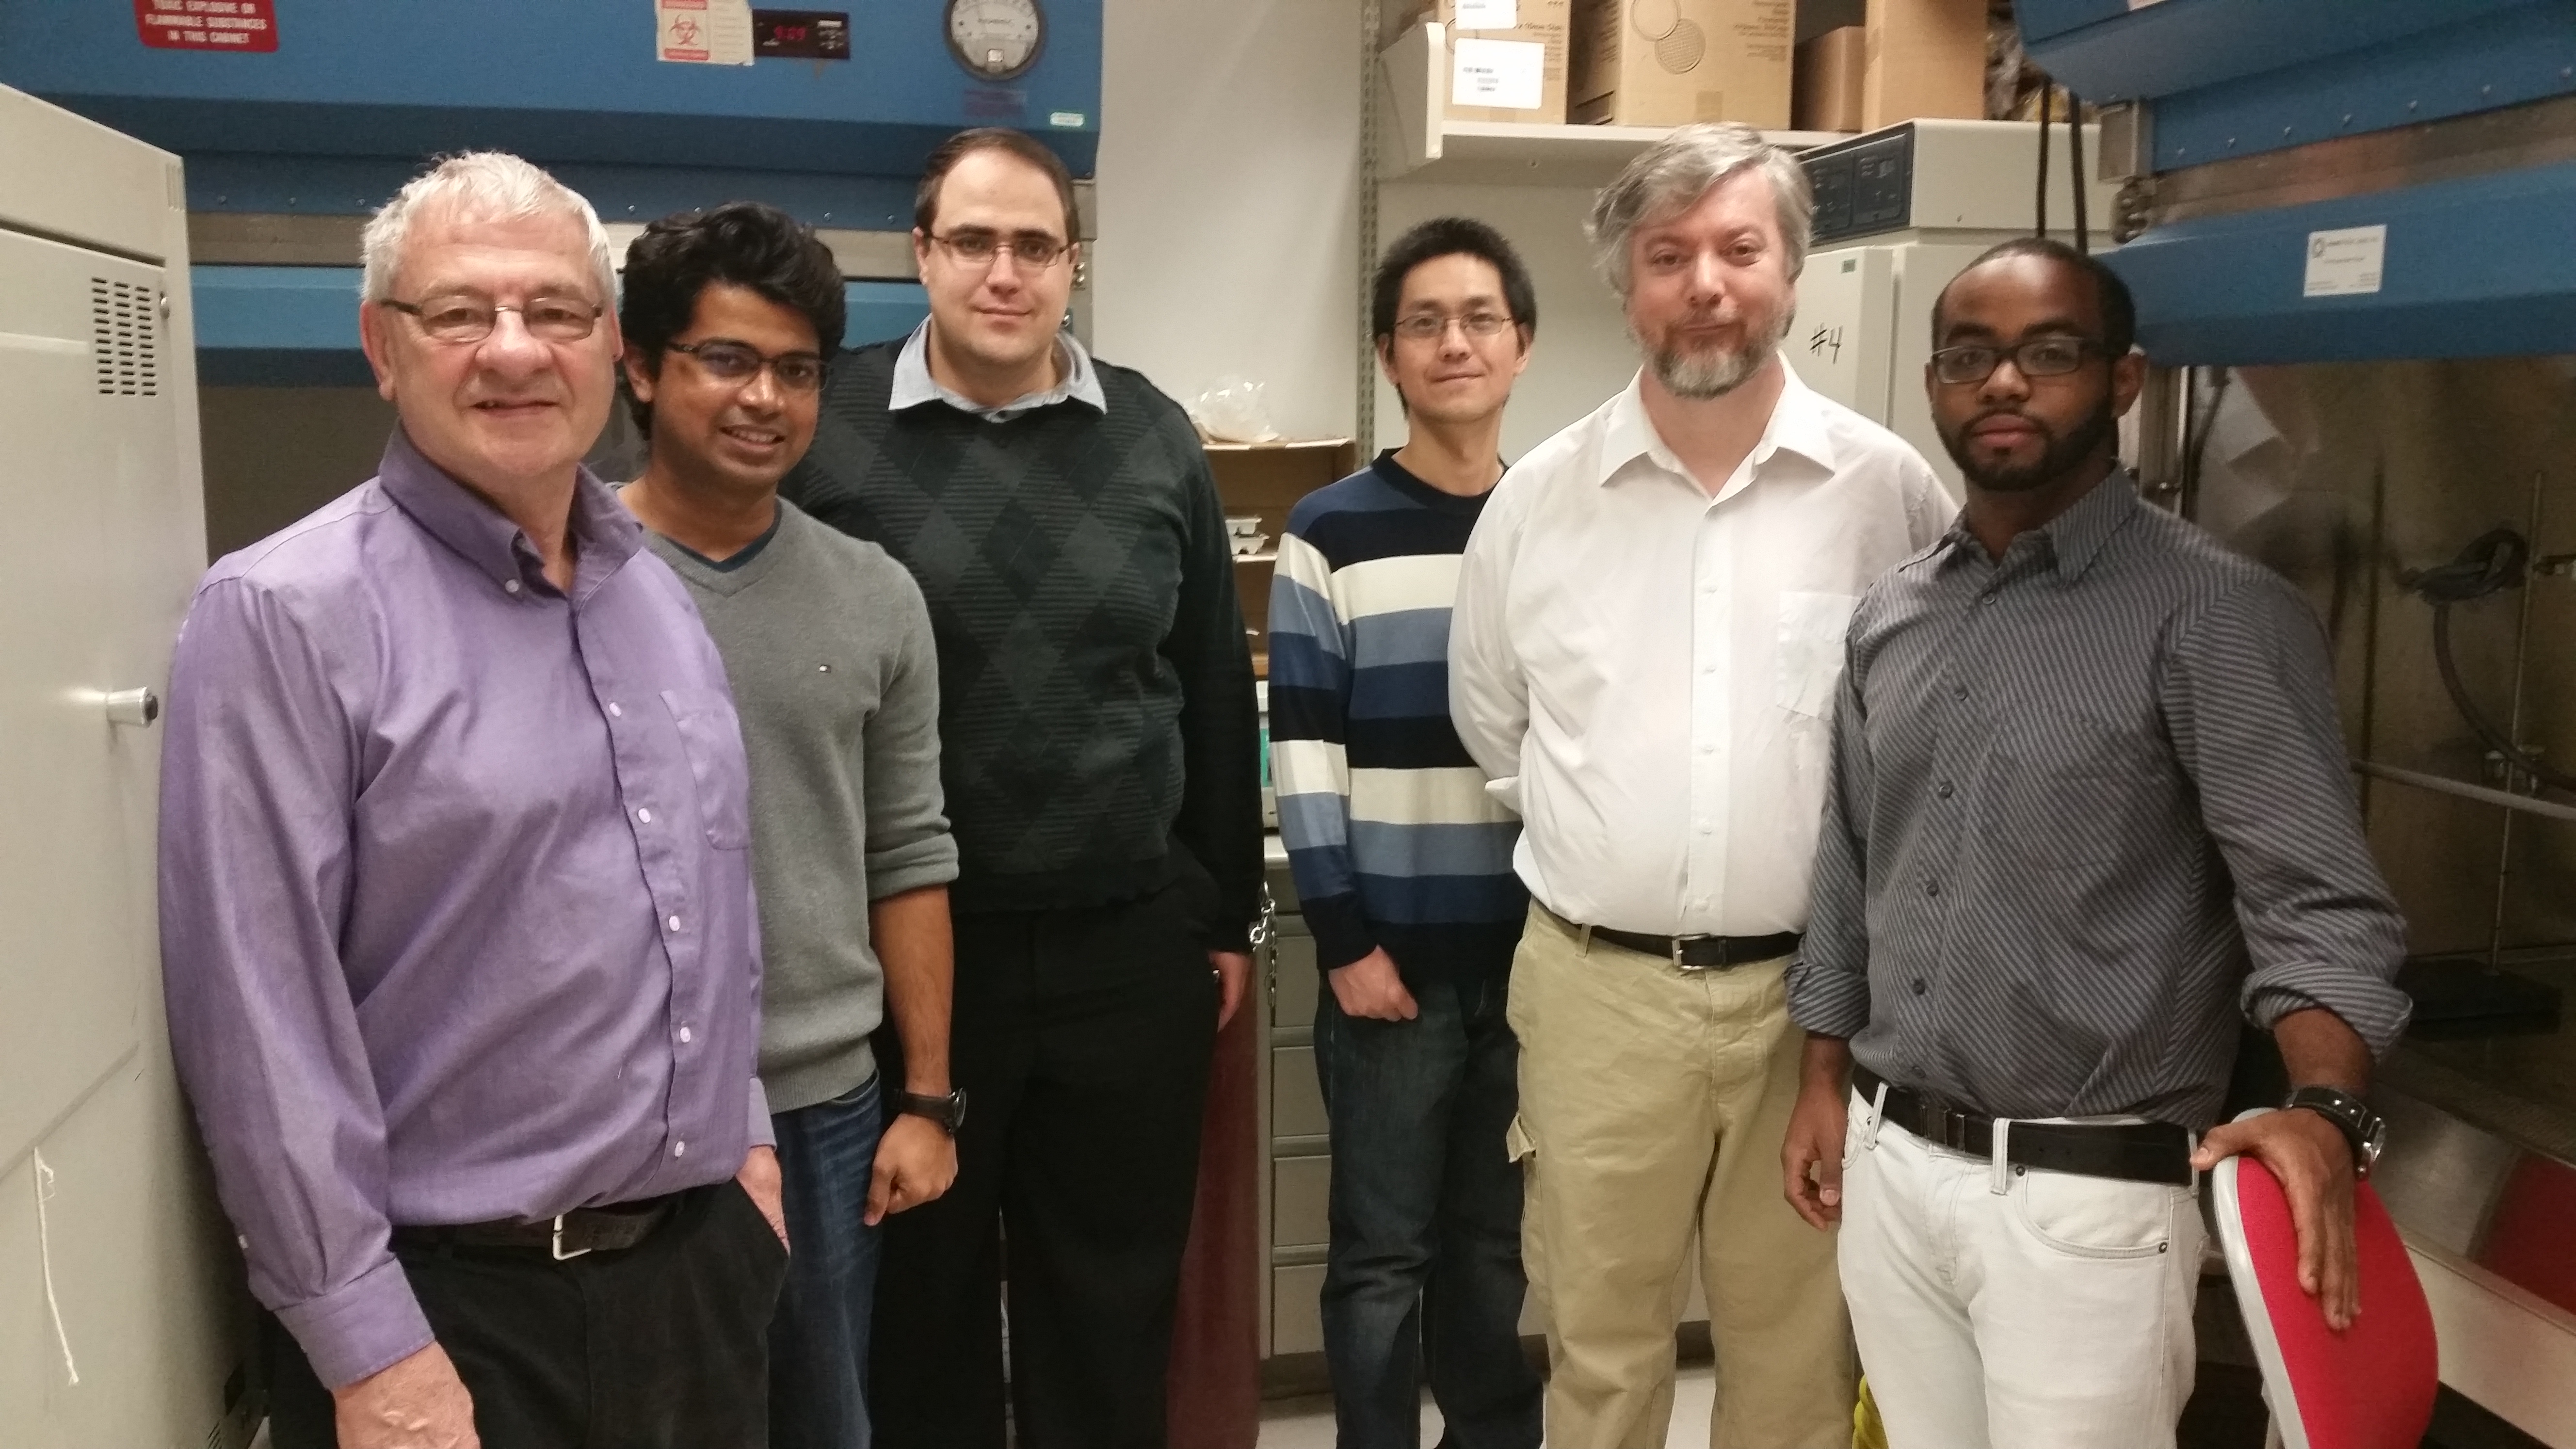 David Brindley (left) with his research team